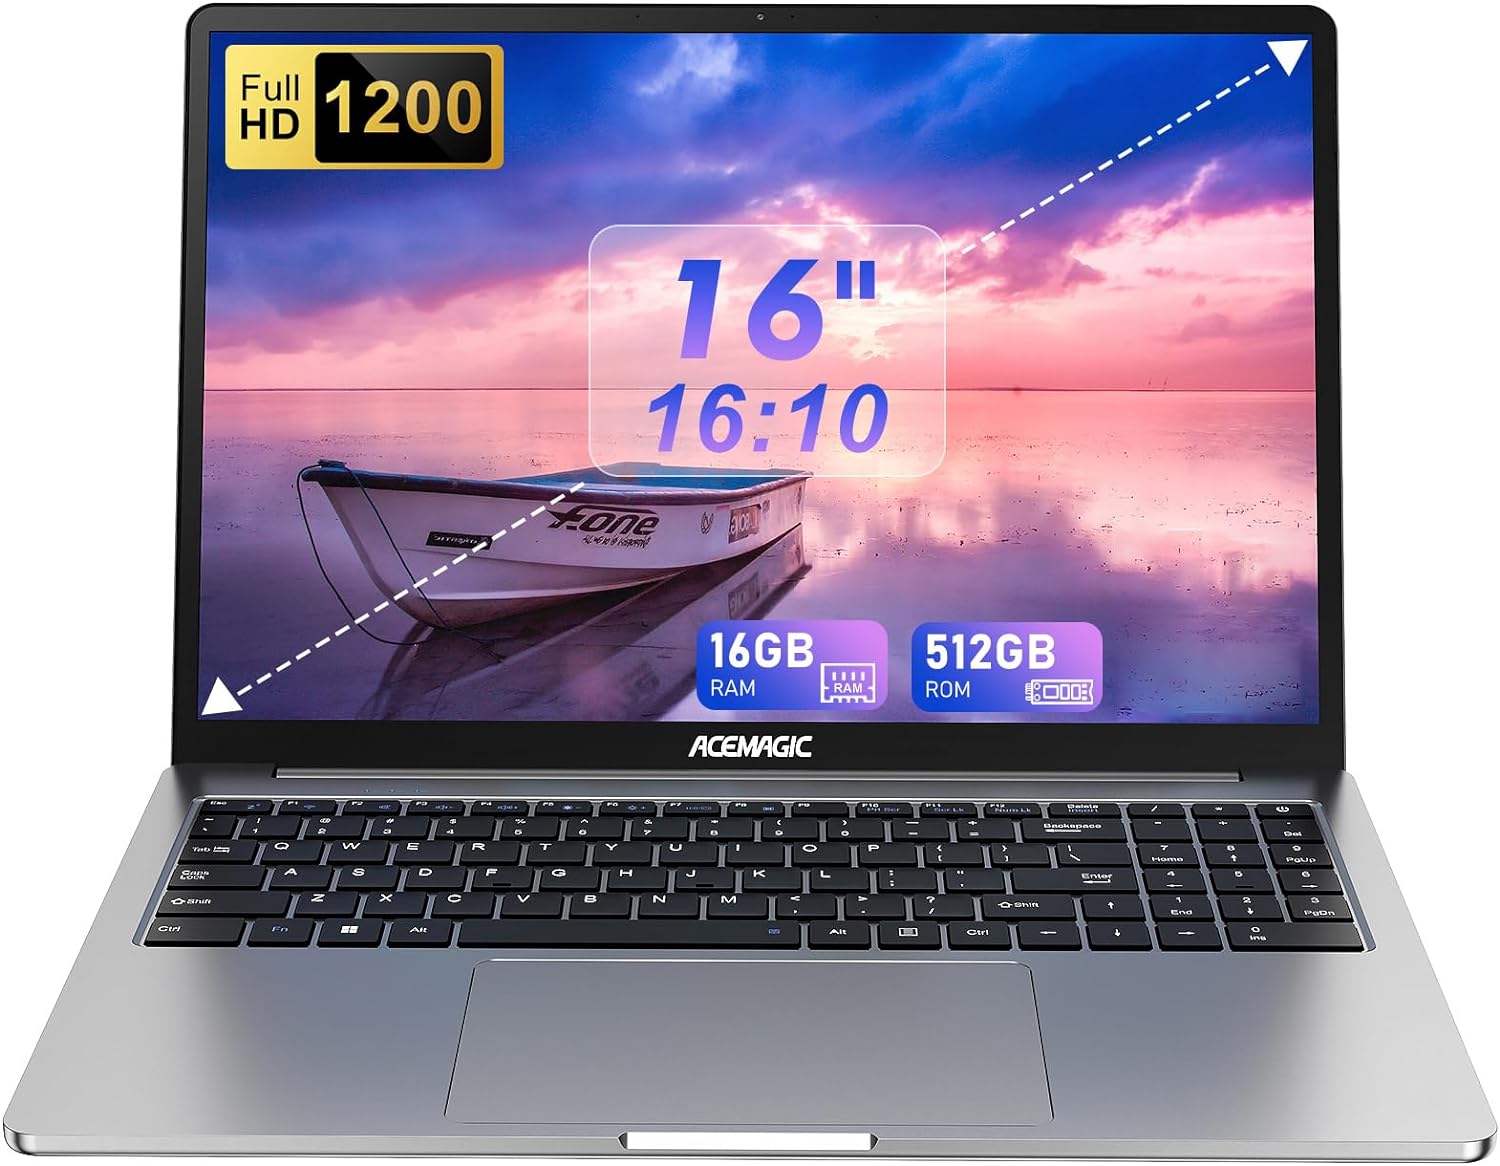 ACEMAGIC 16 inch Laptop Computer,Powered by N95 Processor,16GB DDR4 RAM 512GB SSD,FHD 1920 * 1200P,WiFi,BT5.0,Type_C,38Wh Battery,Traditional Laptop for Everday Needs.